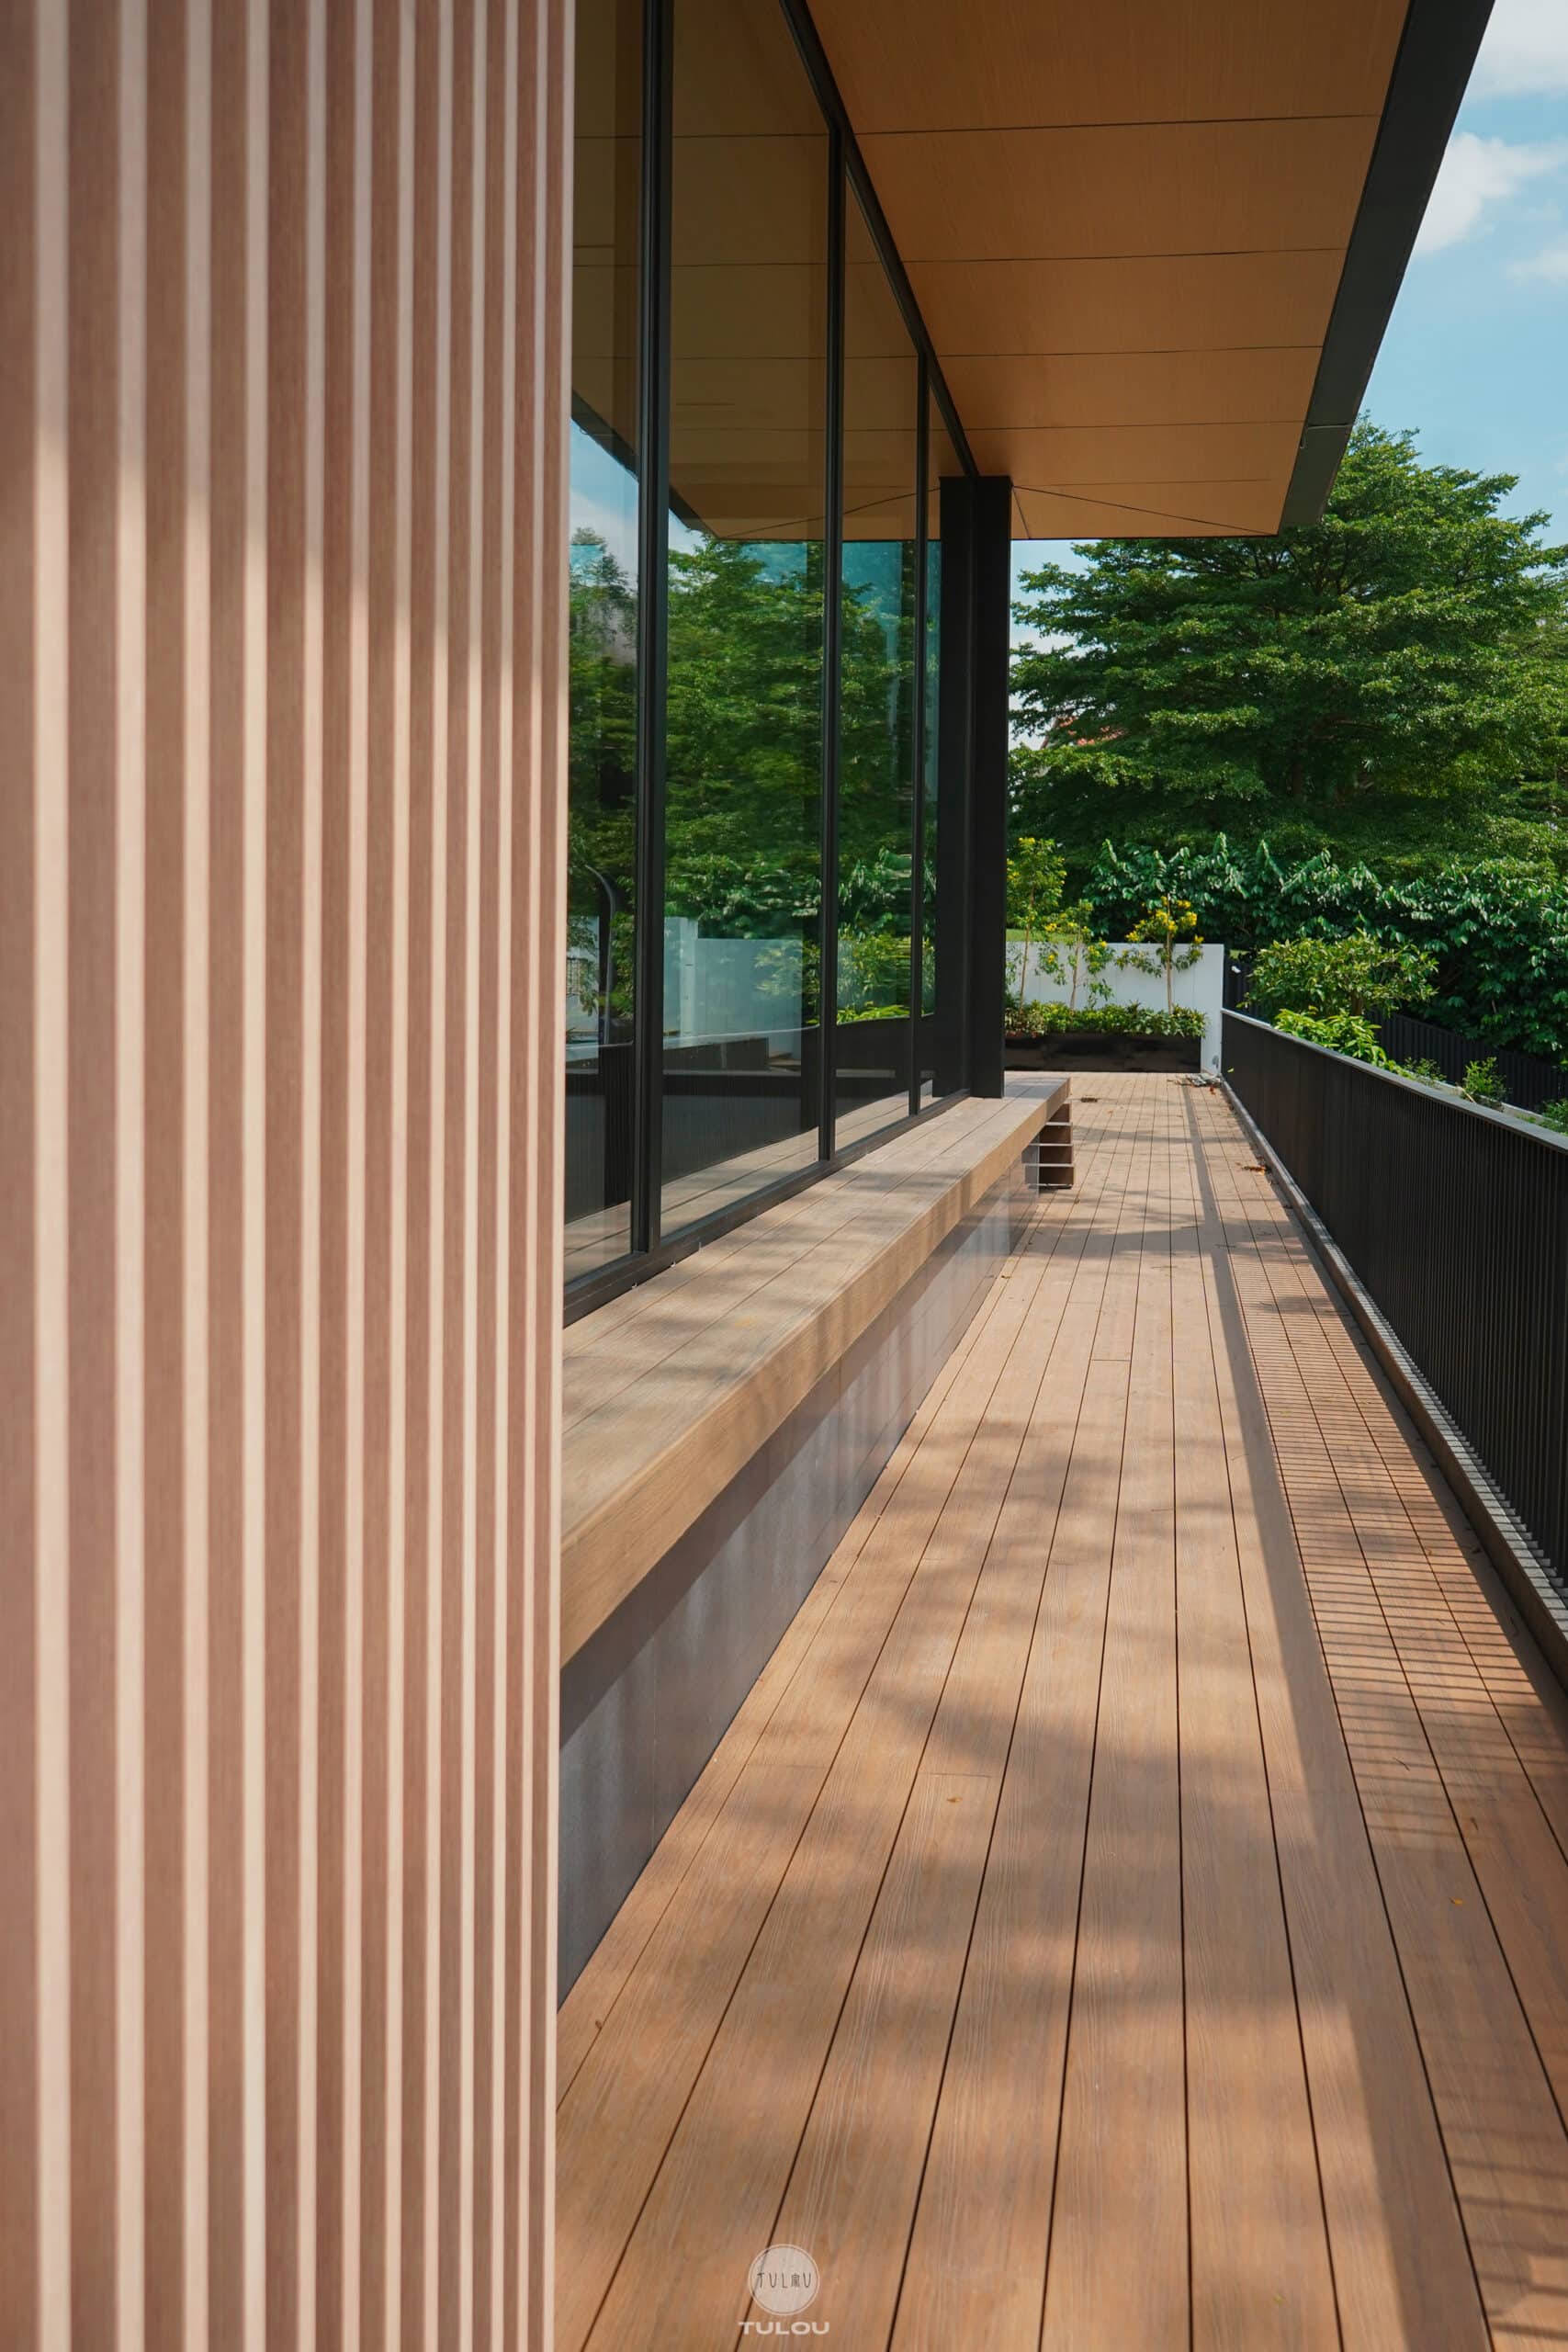 Elevate Your Balcony Tulou Composite Timber Decking Singapore 19 scaled - Elevate Your Balcony with a Composite Timber Deck: Why Singapore Homeowners Choose Tulou